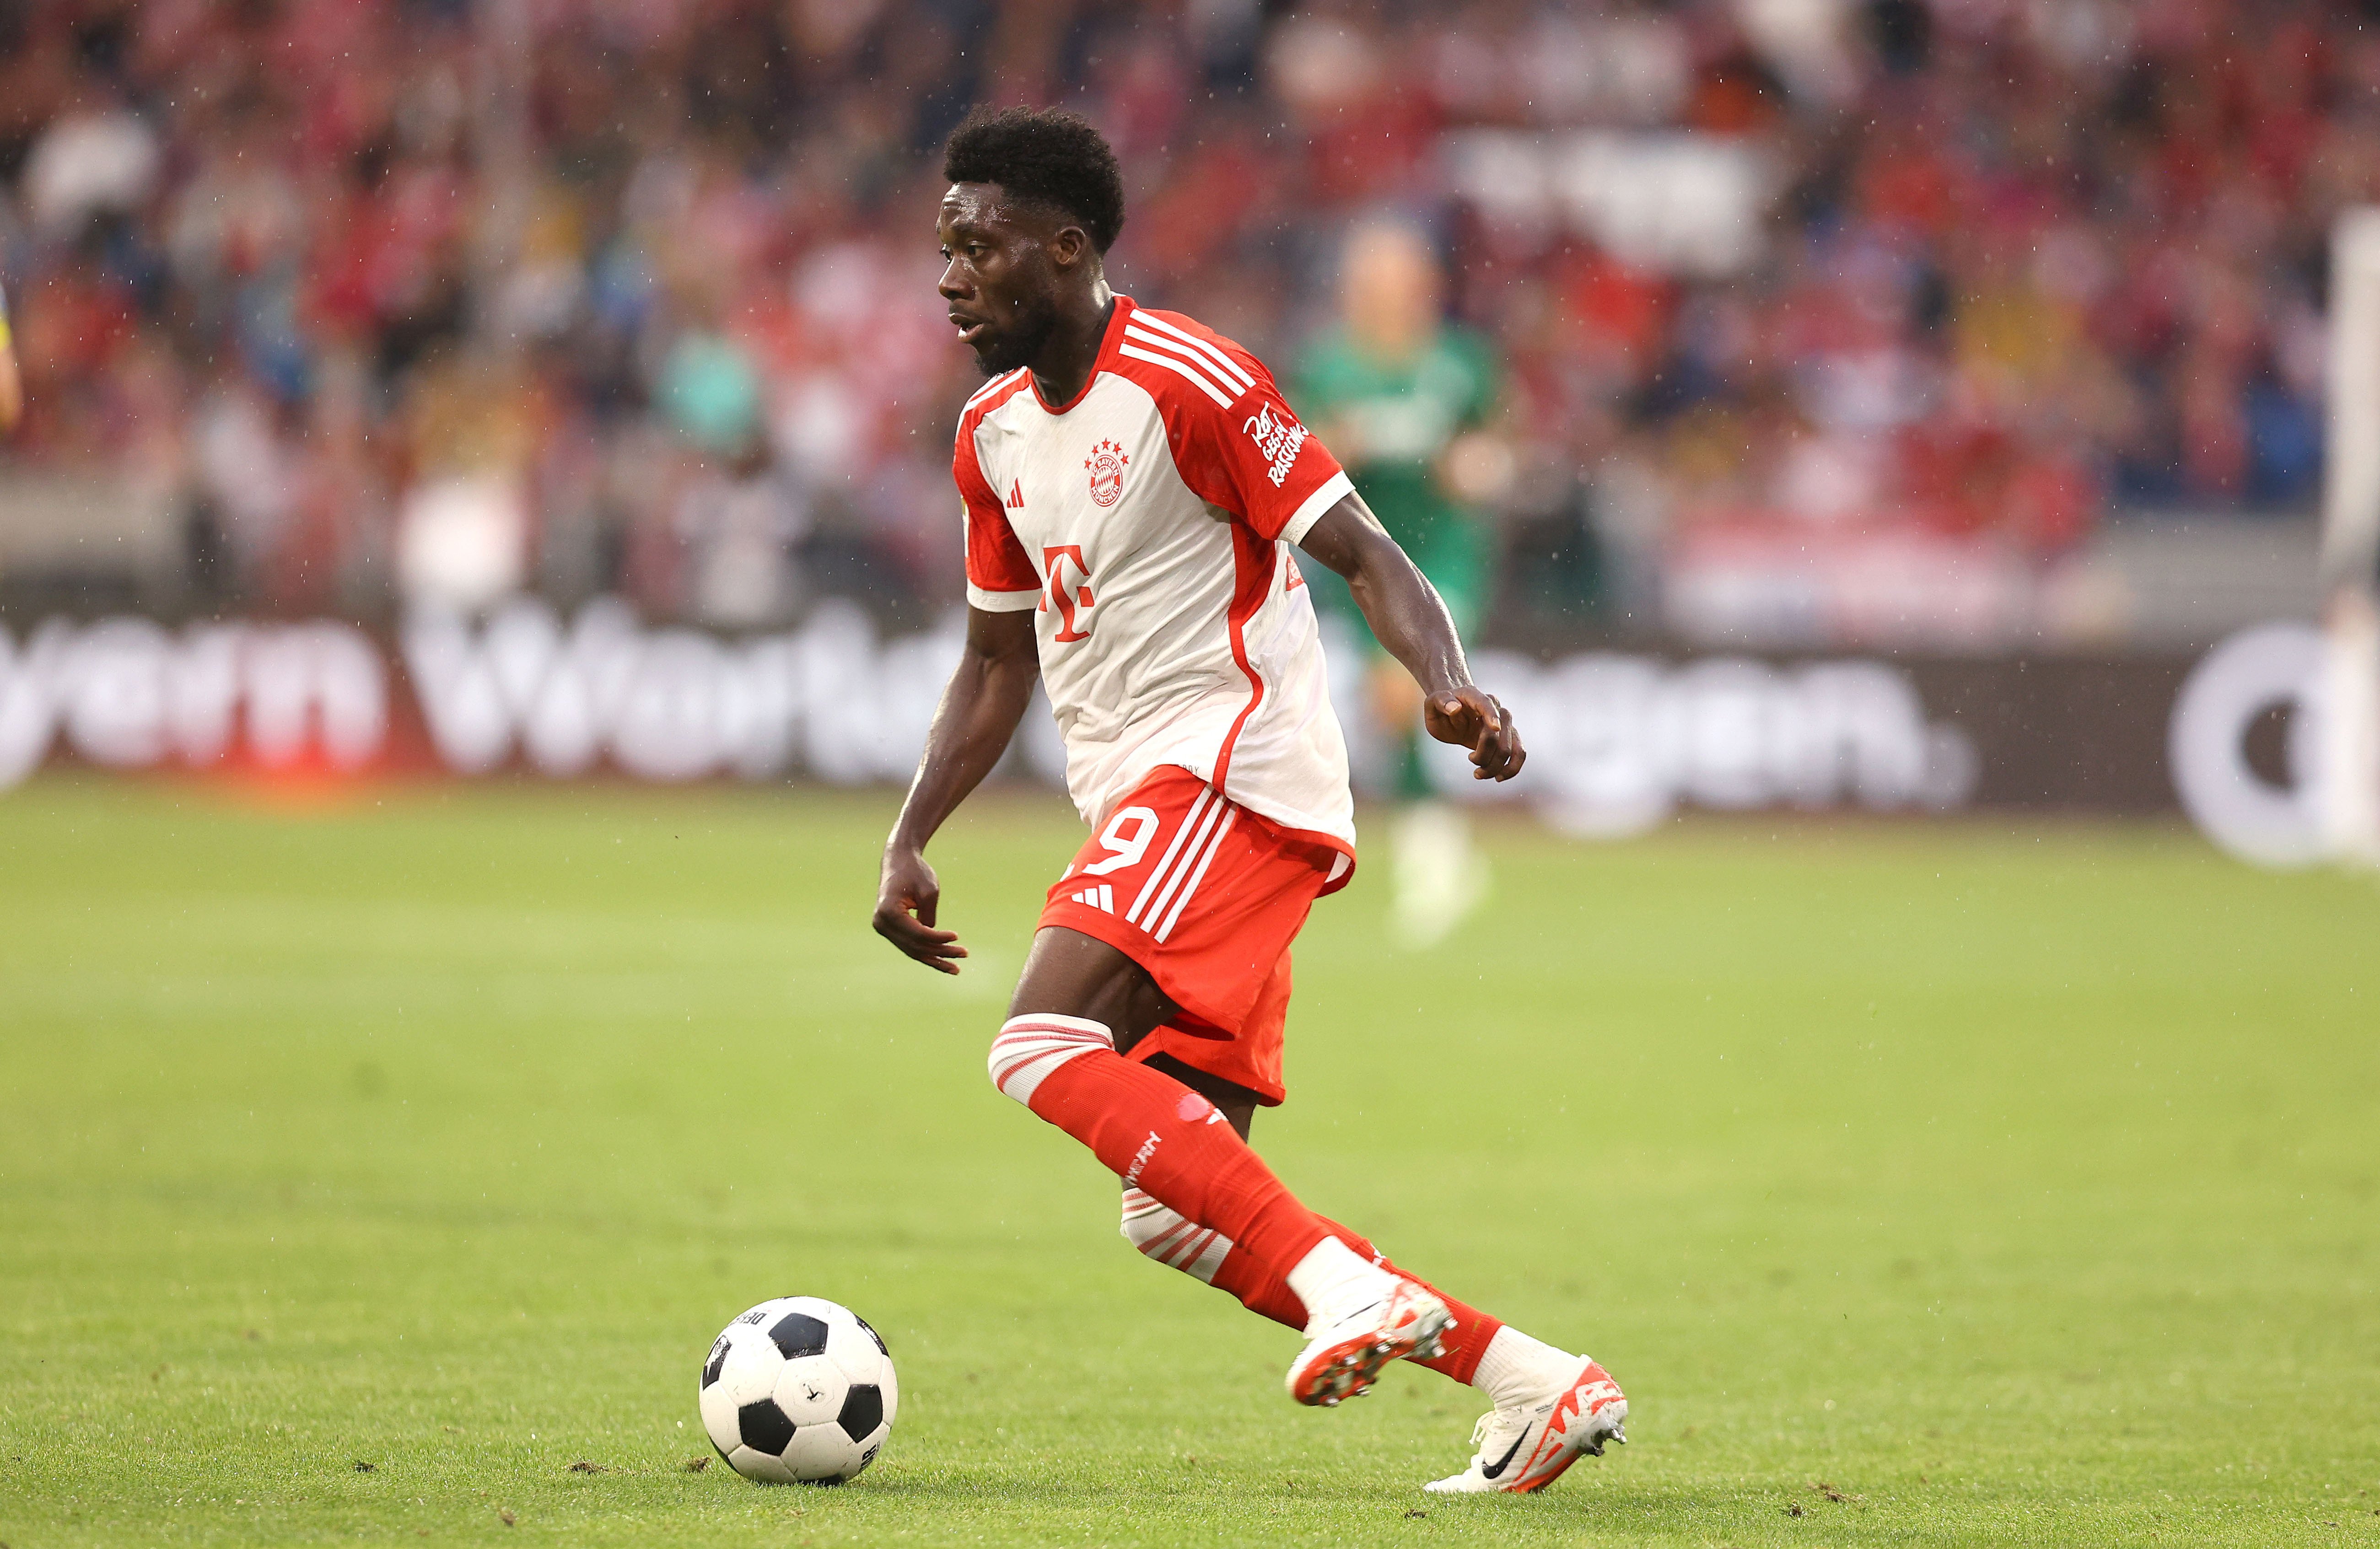 Bayern Munich keen on Real Madrid starter, Alphonso Davies could be used as part of swap deal